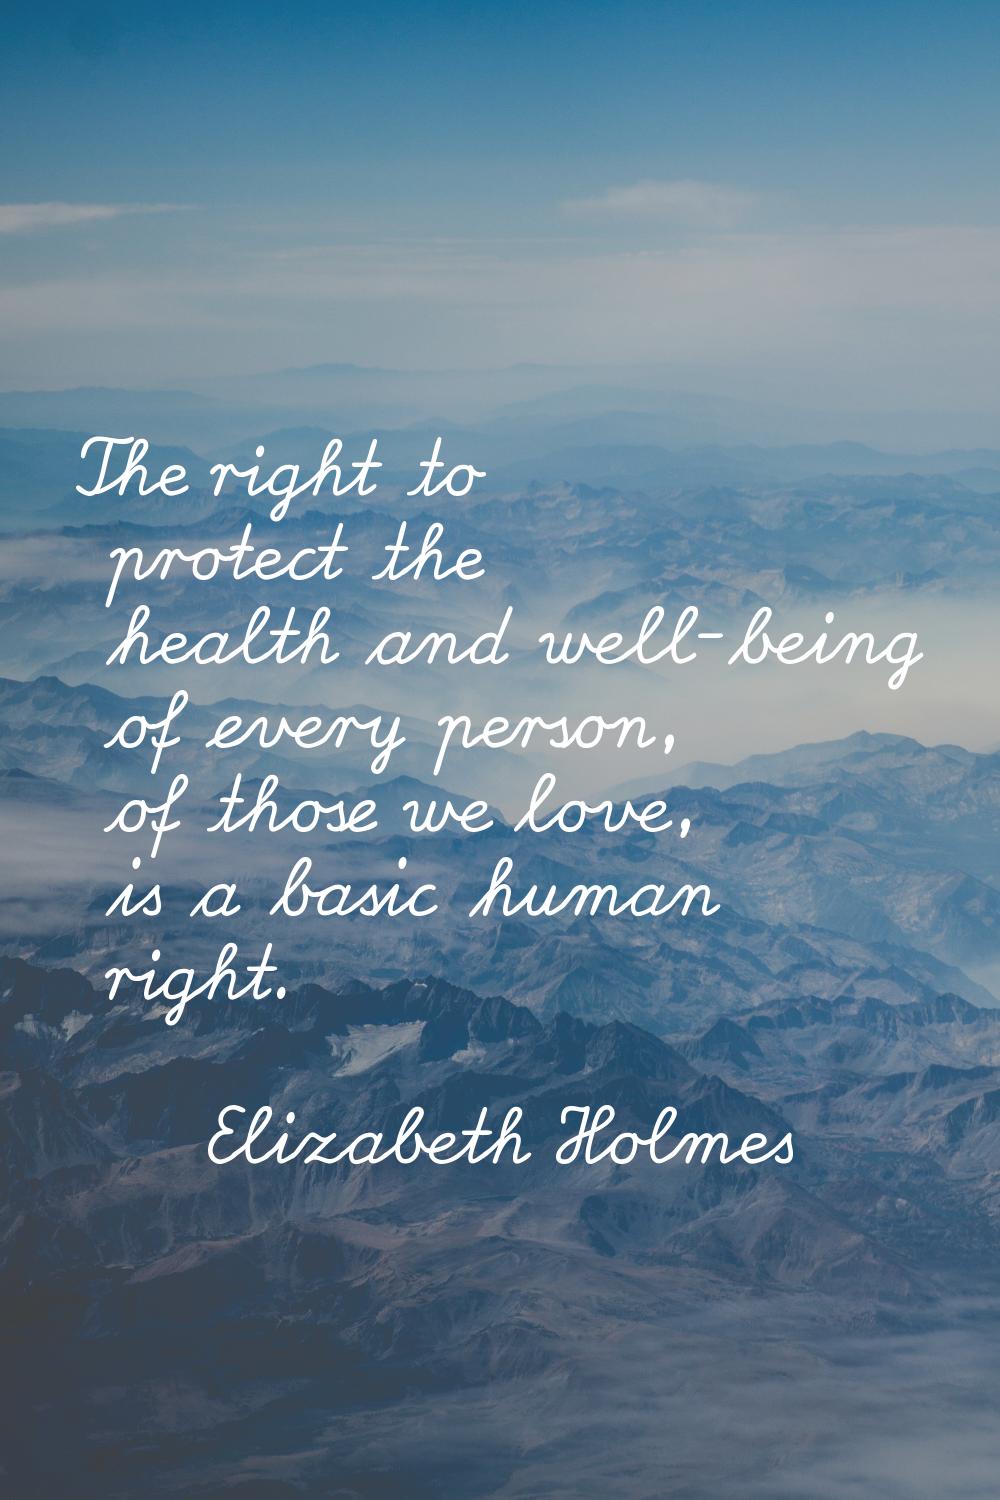 The right to protect the health and well-being of every person, of those we love, is a basic human 